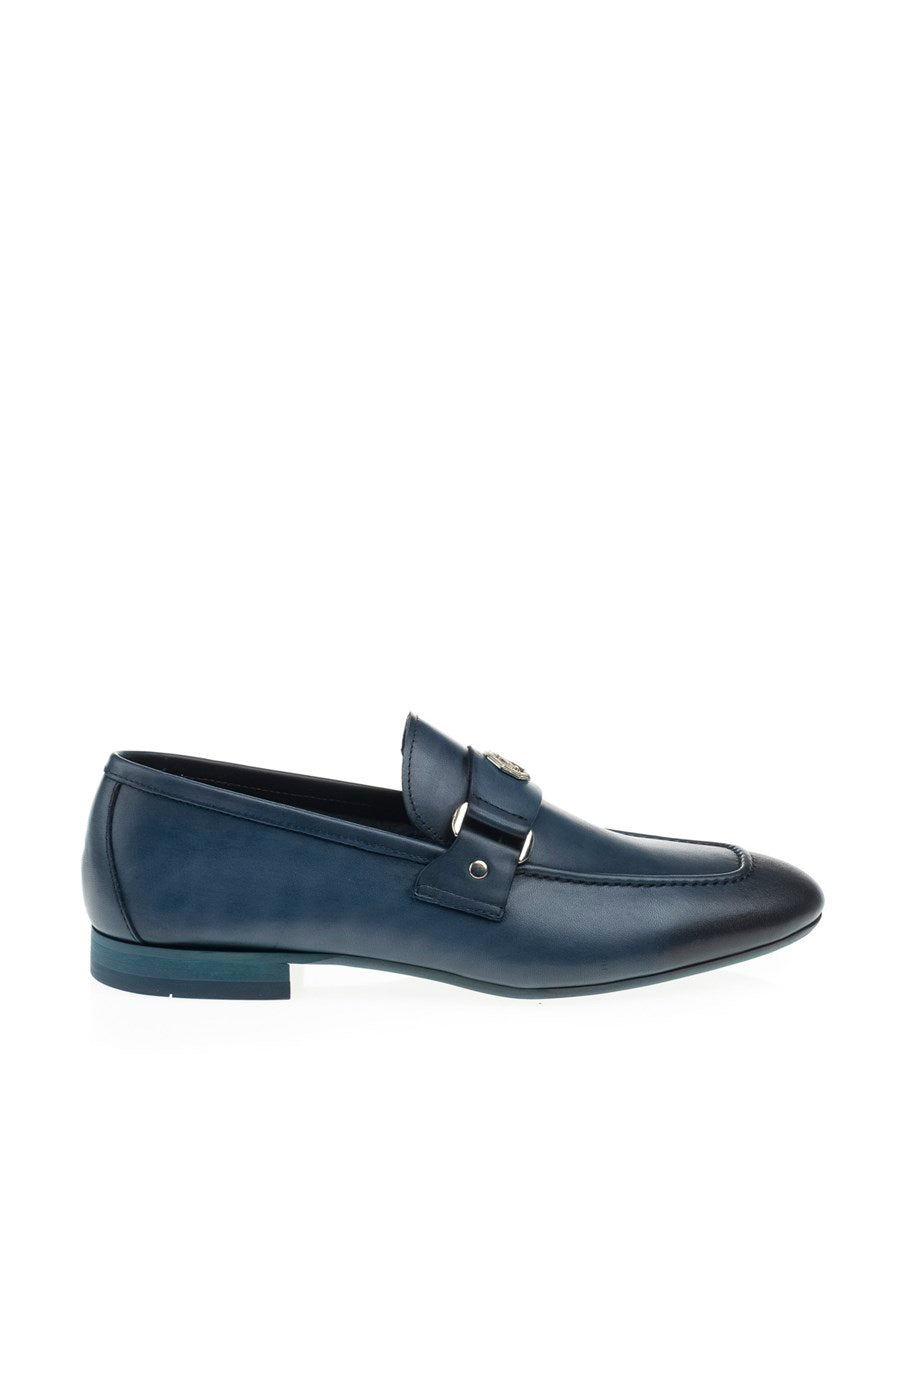 MenStyleWith Buckled Detail Navy Leather Shoes